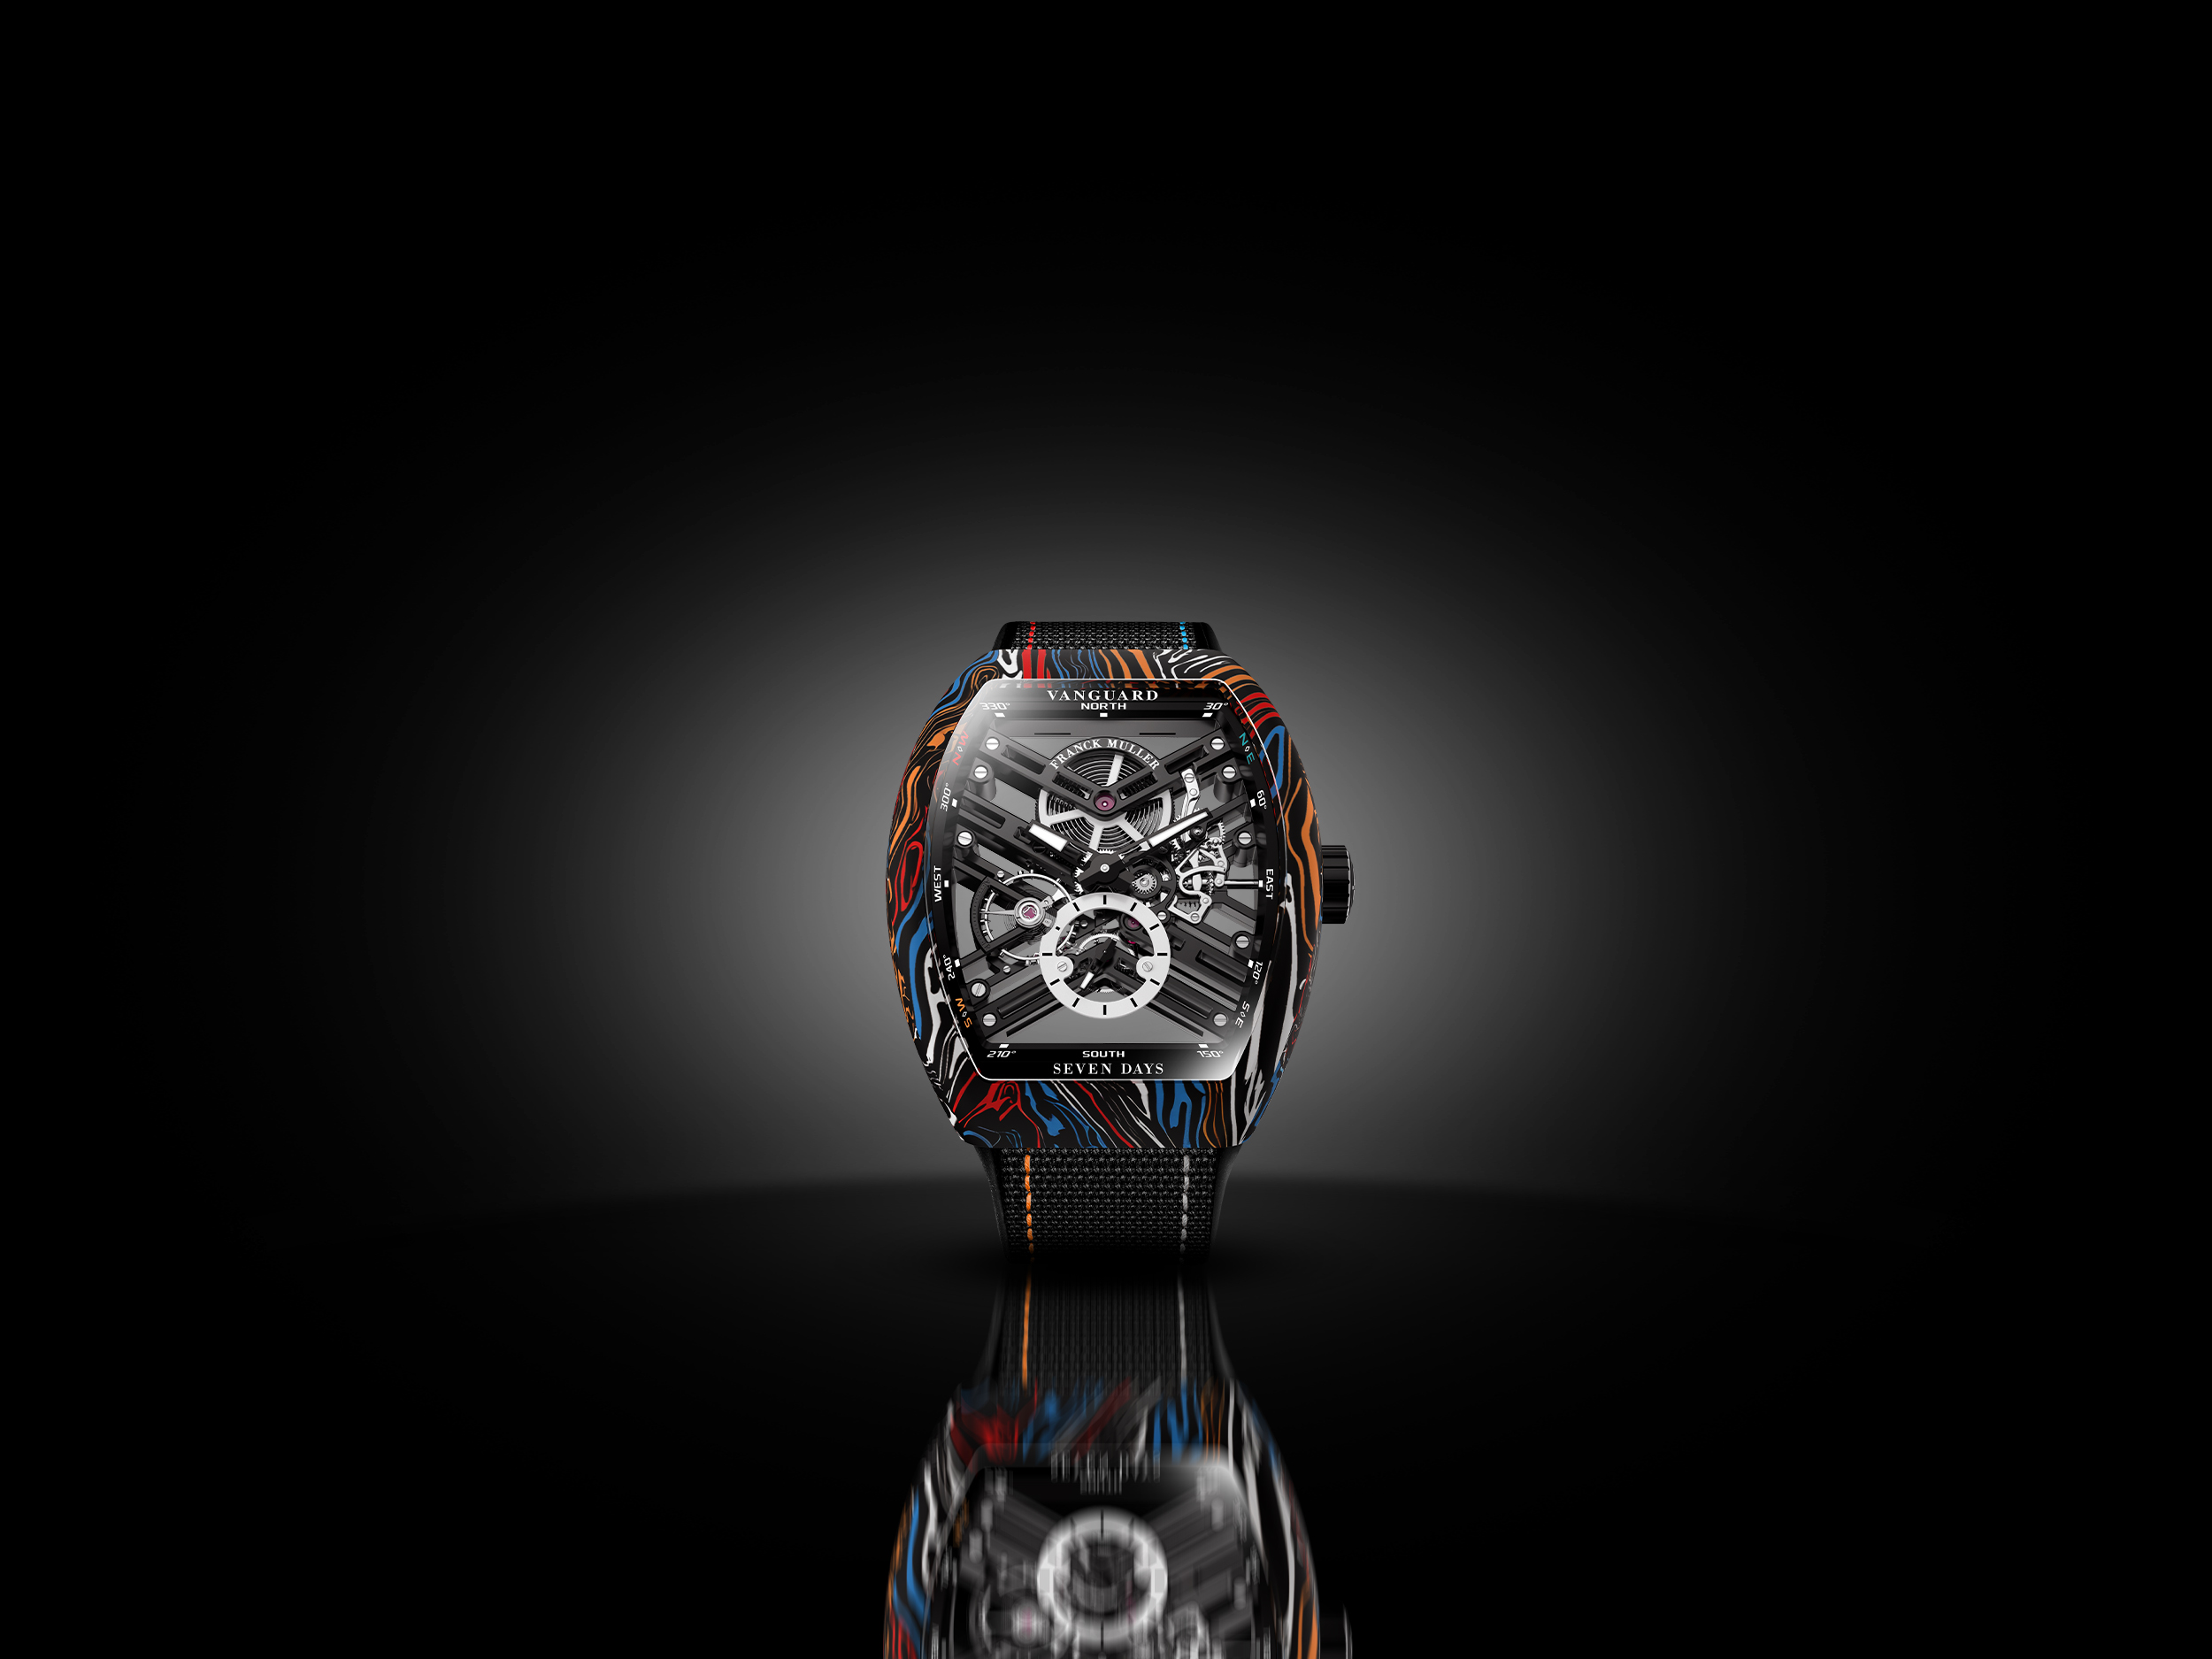 FRANCK MULLER MAKES THE CASE FOR A COLORFUL TWIST: CARBON DAMASCUS